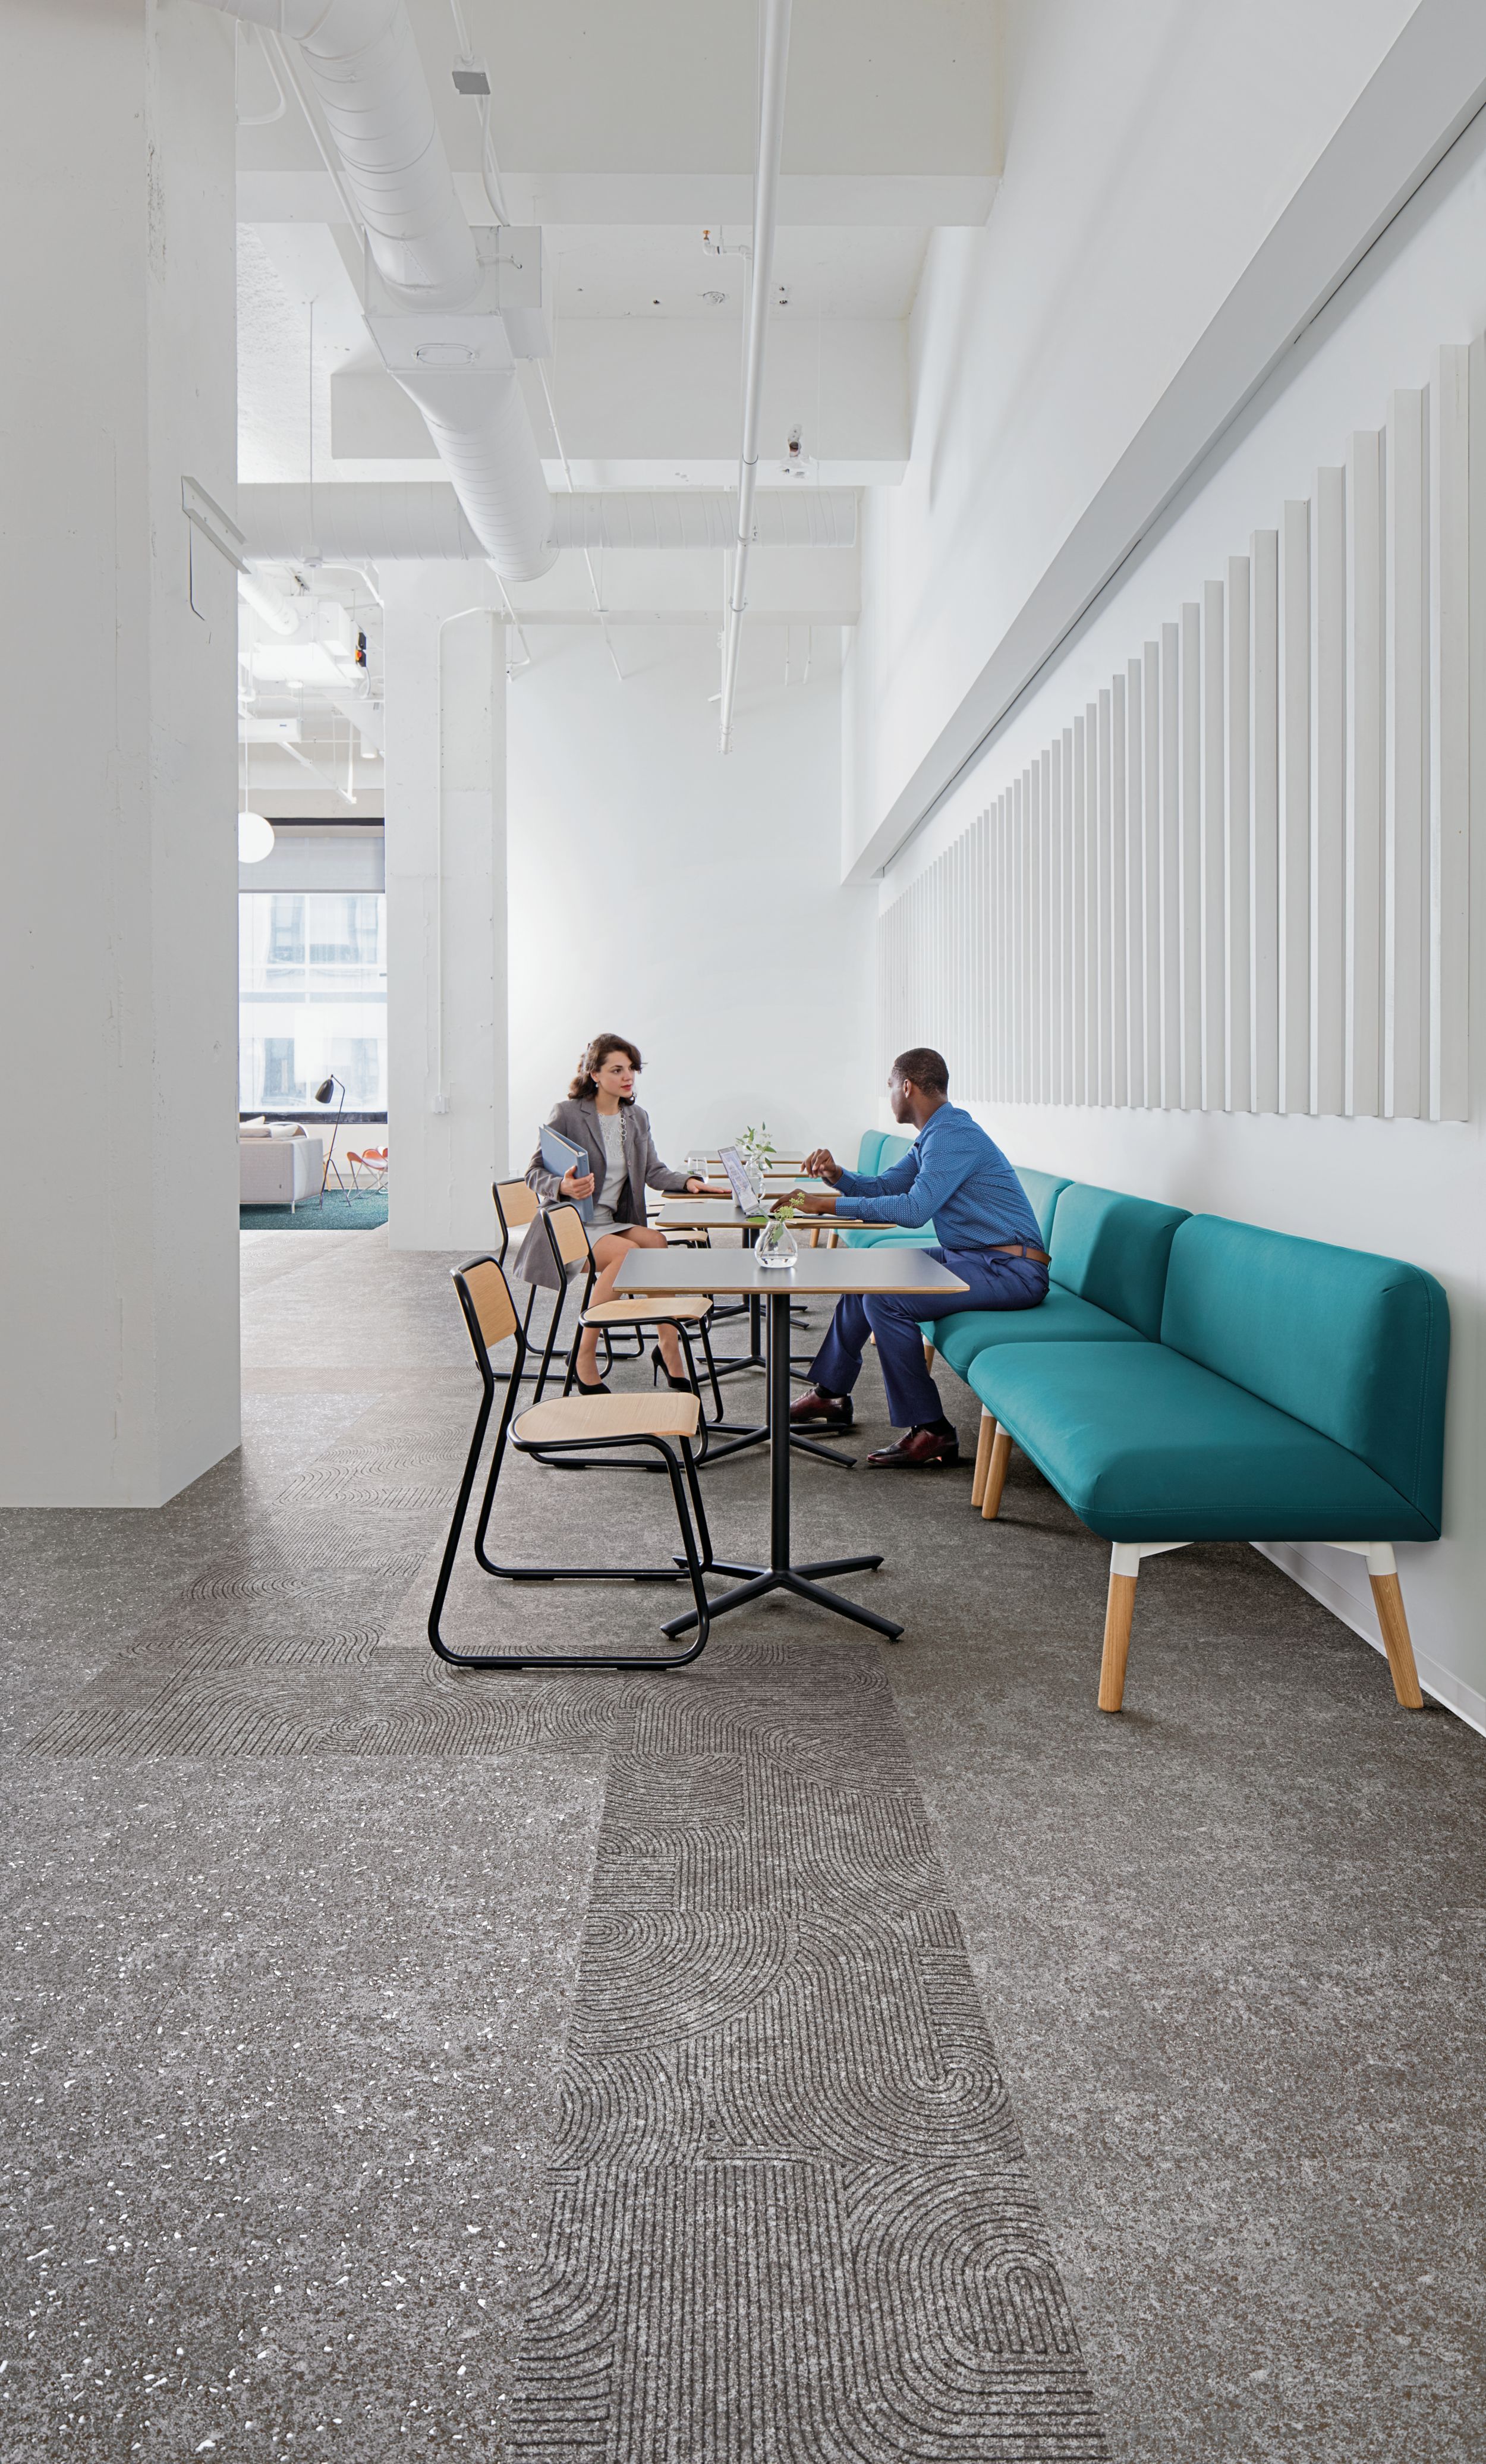 Interface Walk of Life, Walk About and Walk the Aisle LVT in an office break area numéro d’image 5